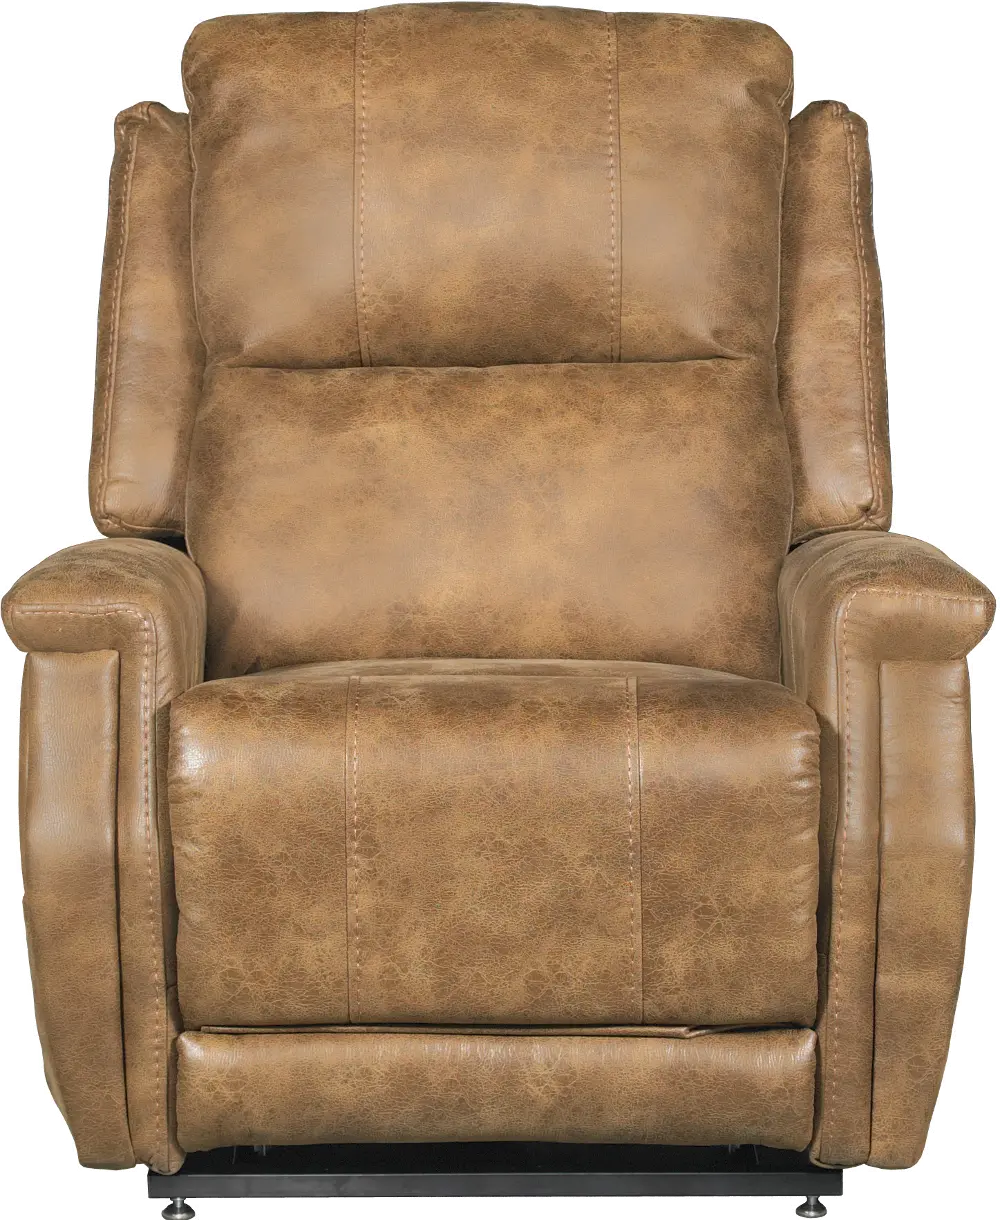 Devin Saddle Brown 3 Motor Lift Chair-1